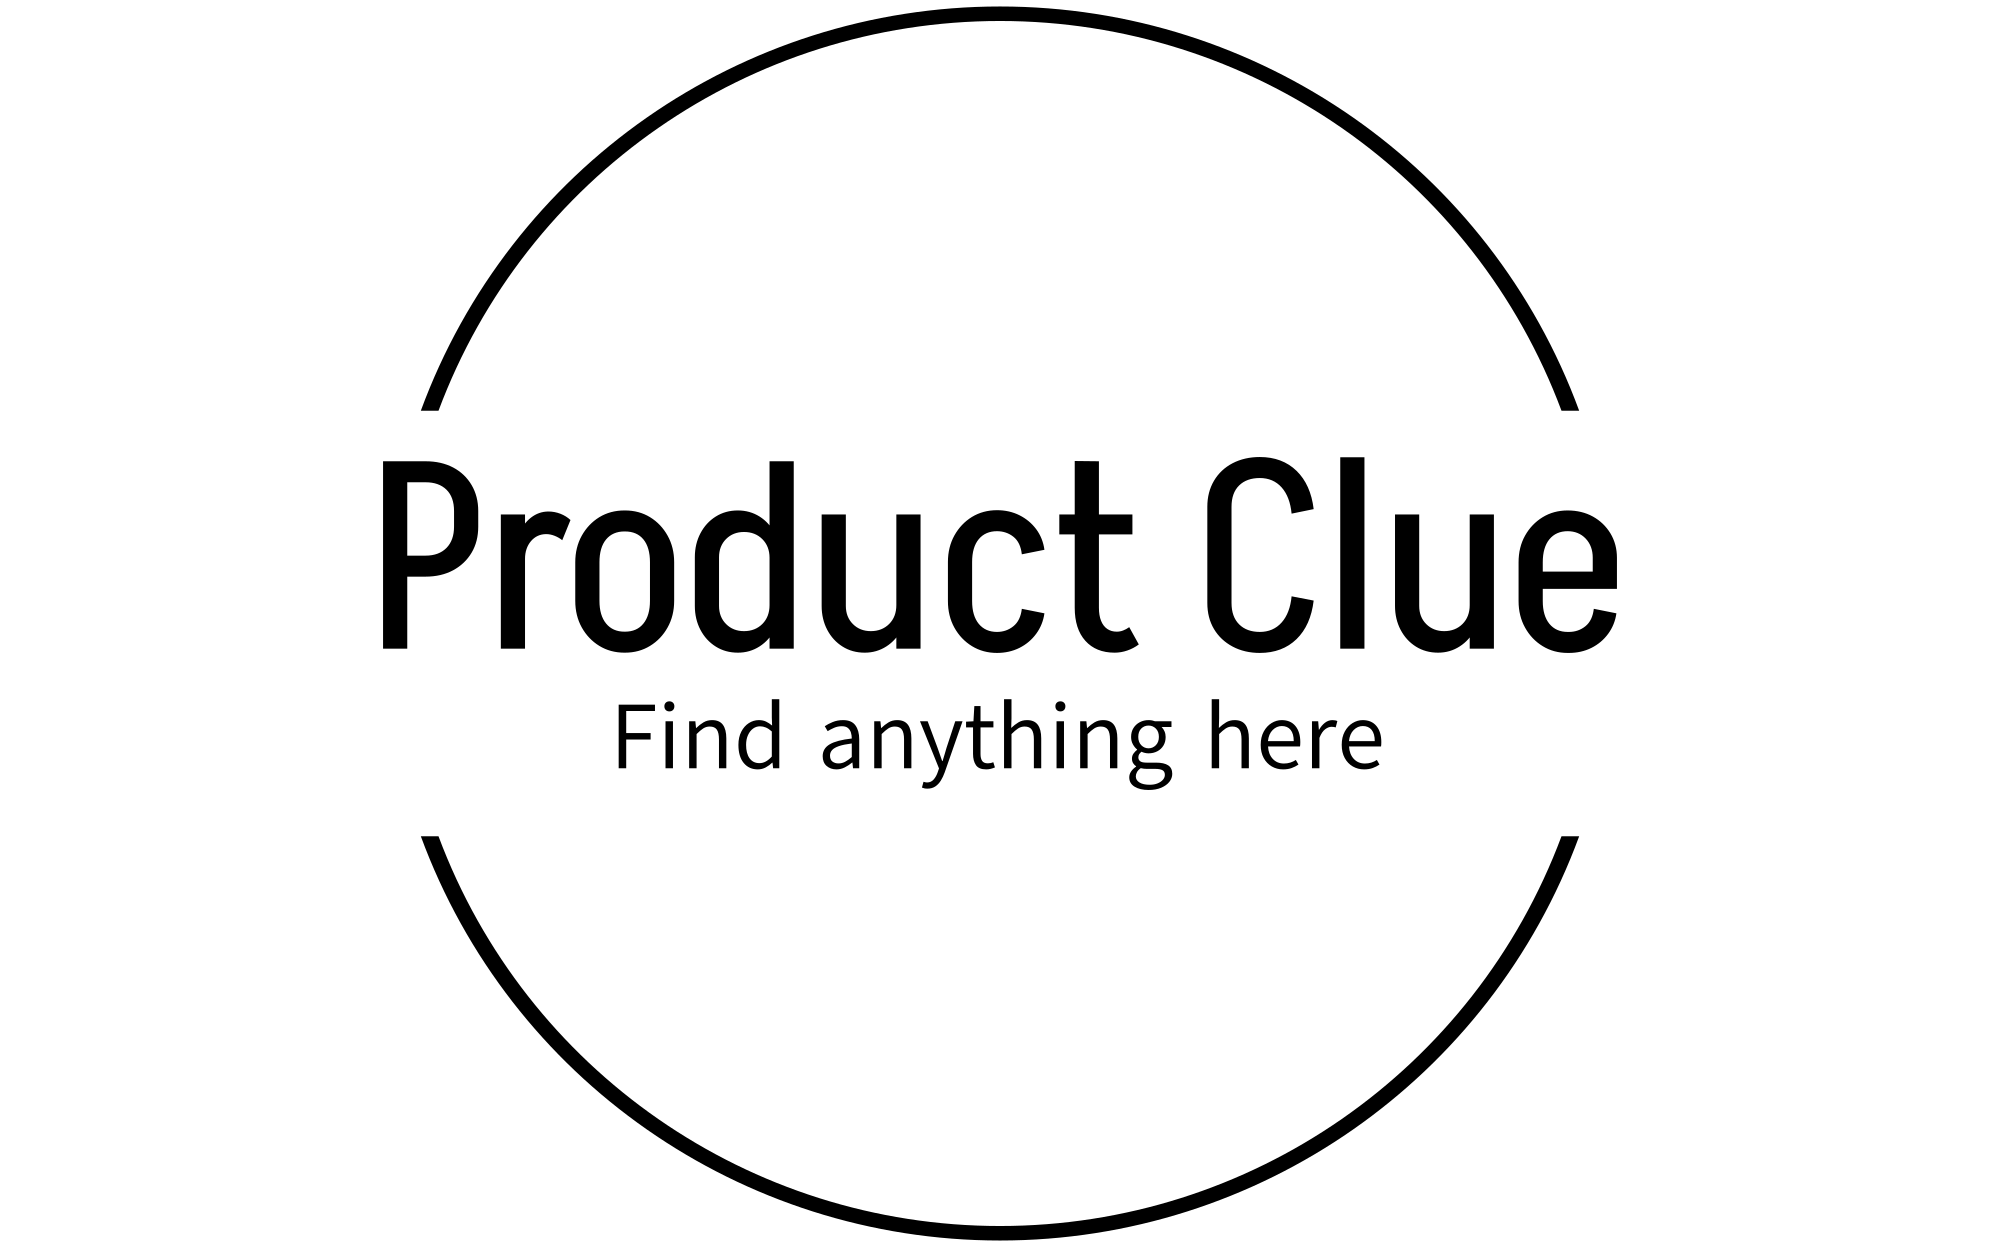 Product Clue Footer